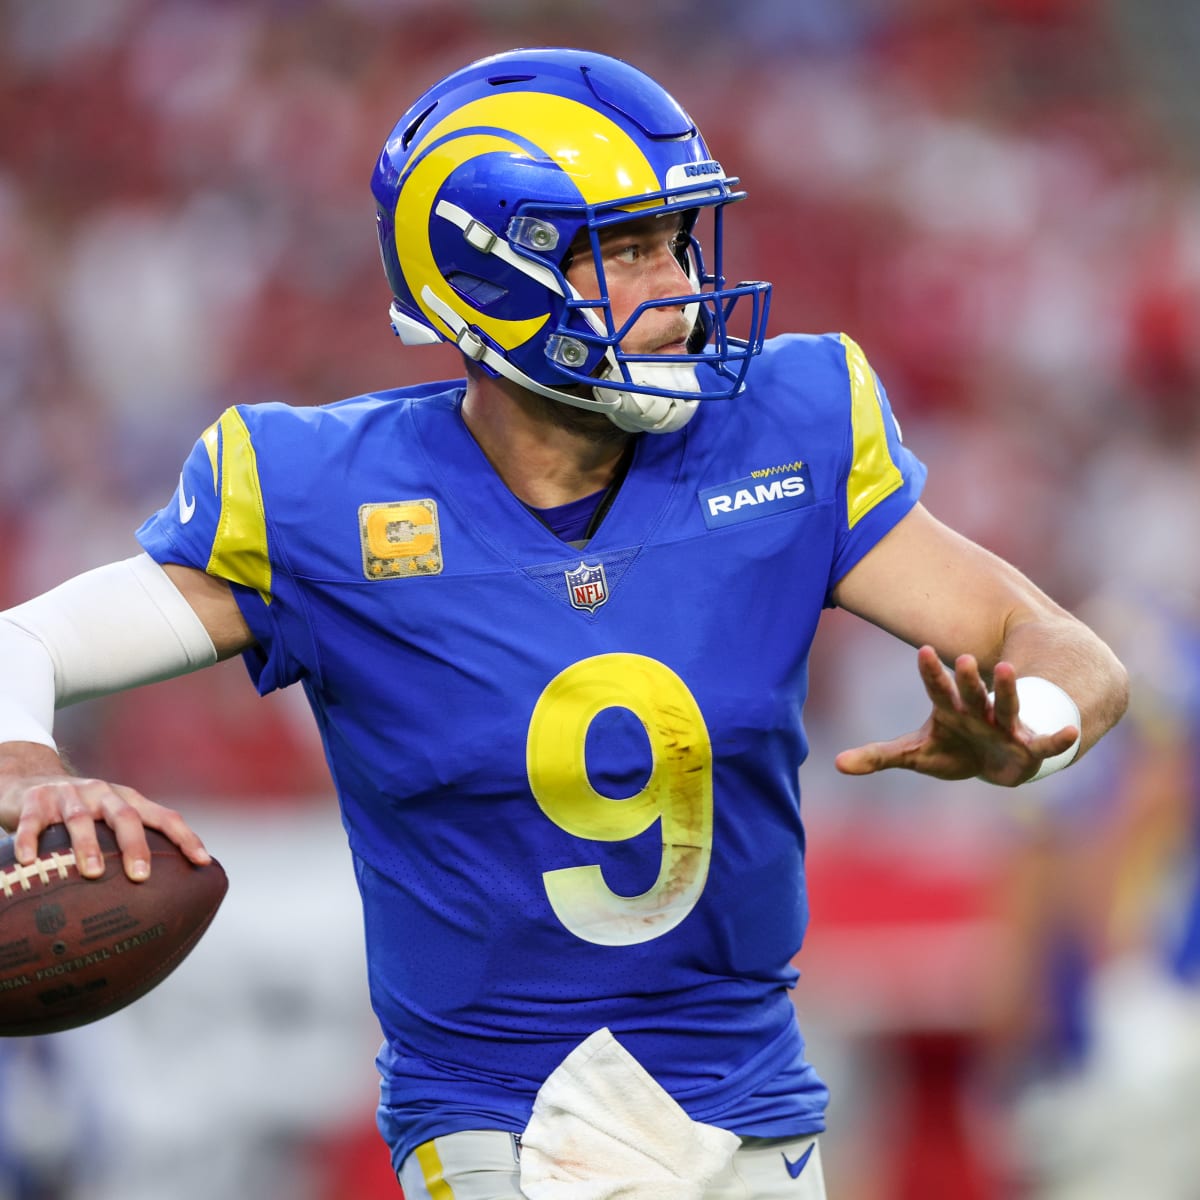 A look at the Rams' uniforms through the years